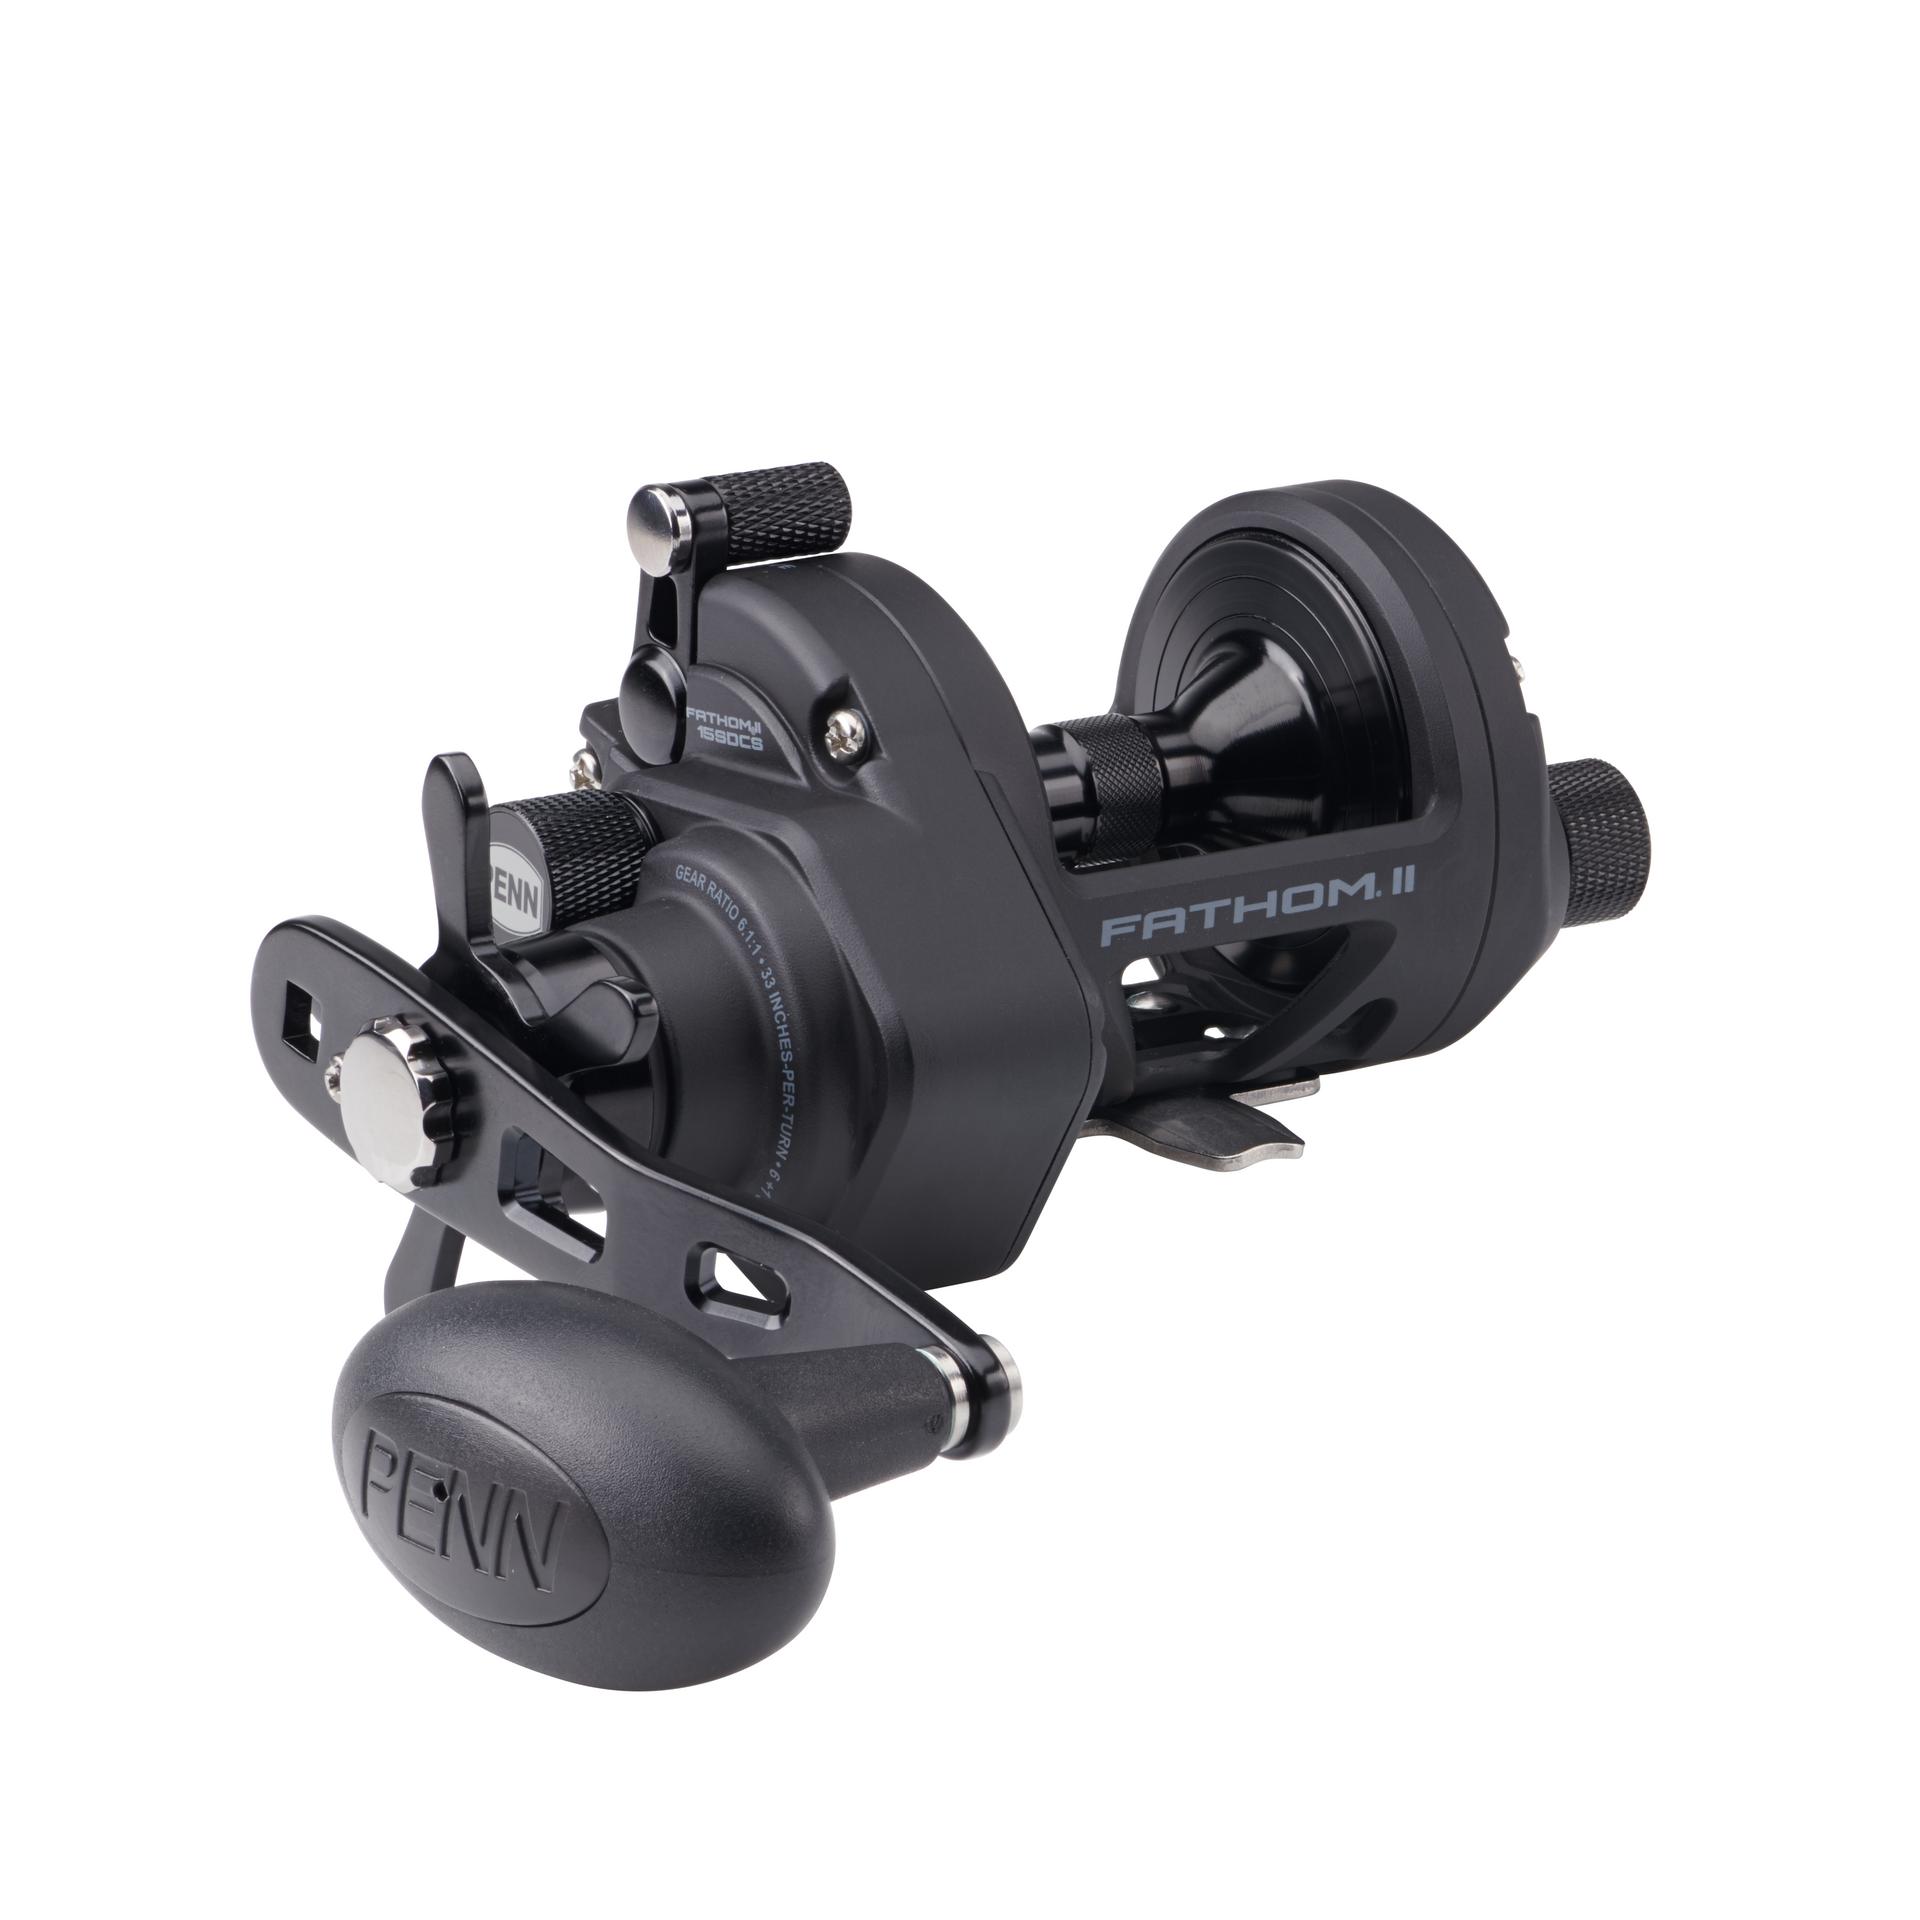 TackleWest - The ultimate drone fishing reel, Penn Slammer 10500 Restocked  and ready to fish! • • • #tacklewest #reel #fishingreel #fishingwa  #fishingperth #fishing #penn